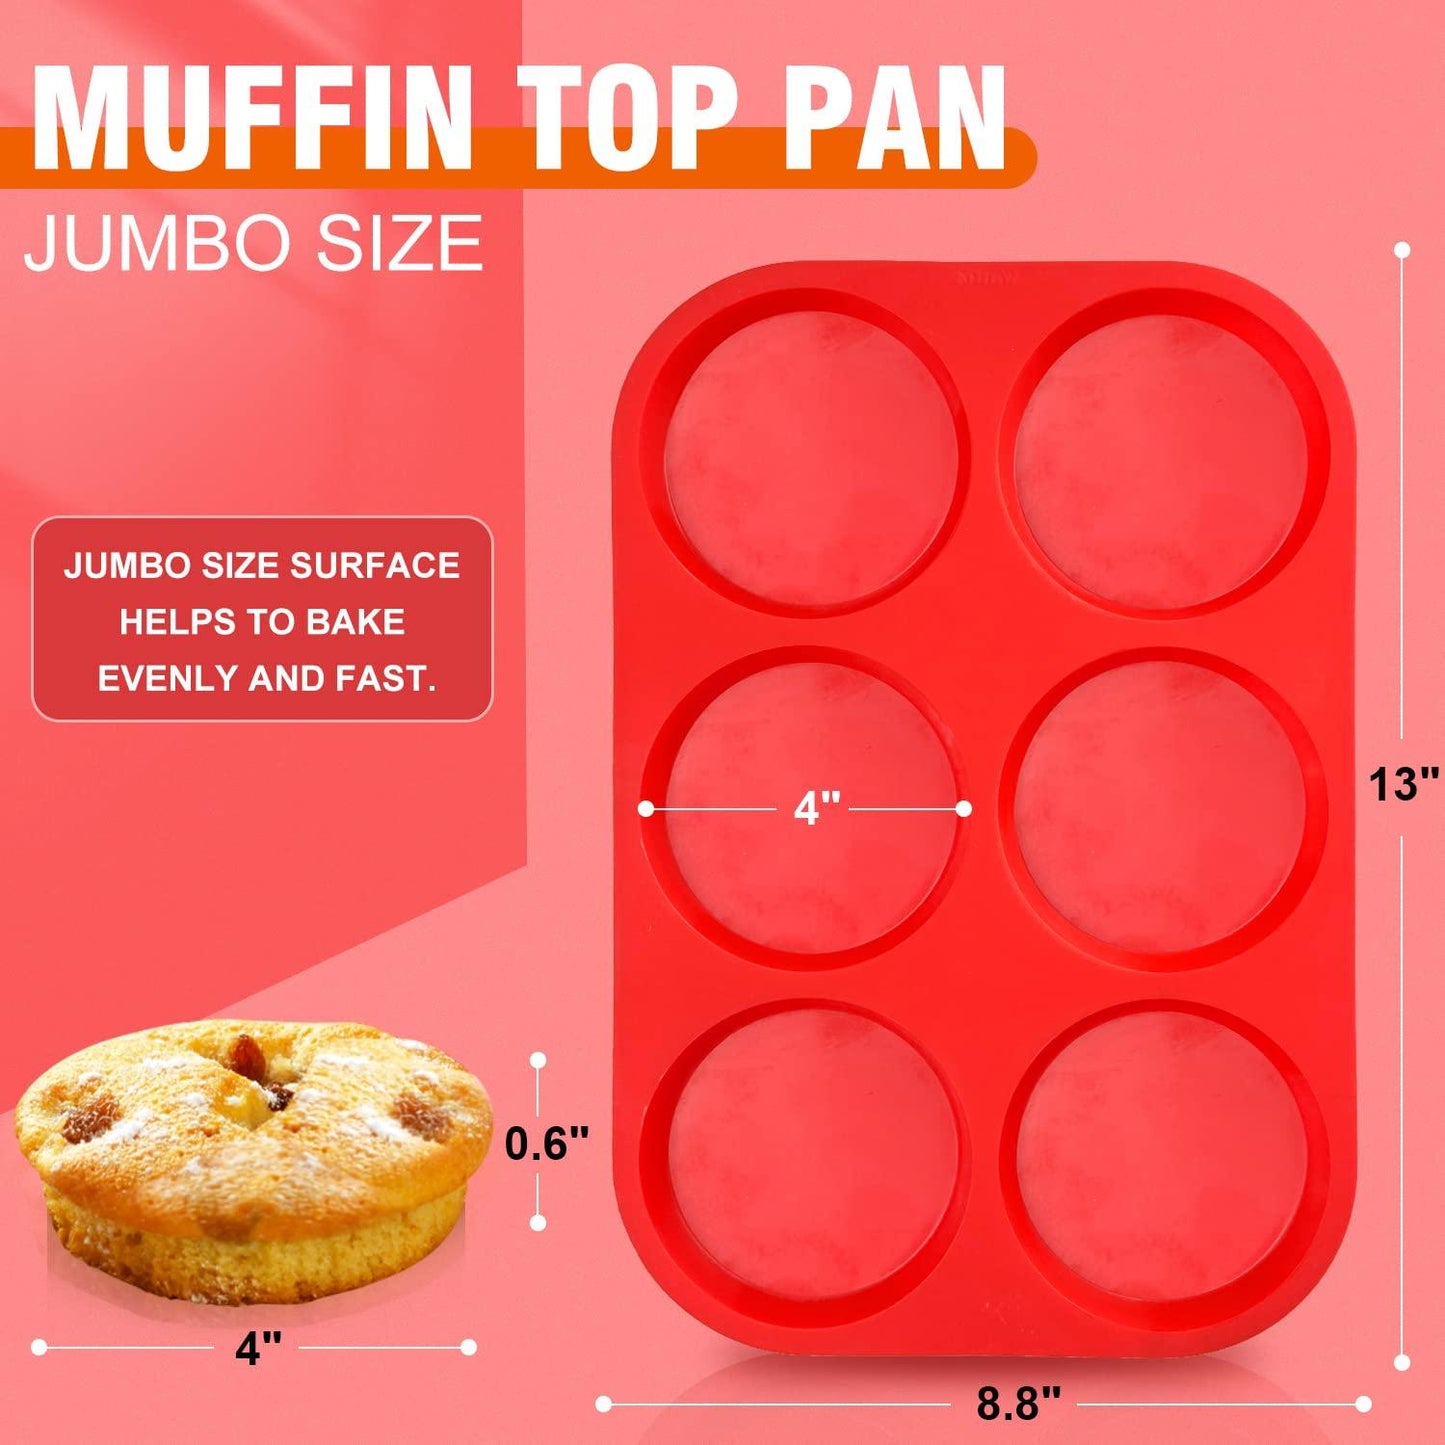 Walfos Silicone Muffin Top Pans for Baking 4inch Jumbo Size, Perfect Results Premium Non-Stick Bakeware Egg Baking Pan, Great for Eggs, Hamburger Bun, Muffin Top and More, Food Grade & BPA Free, 2pcs - CookCave